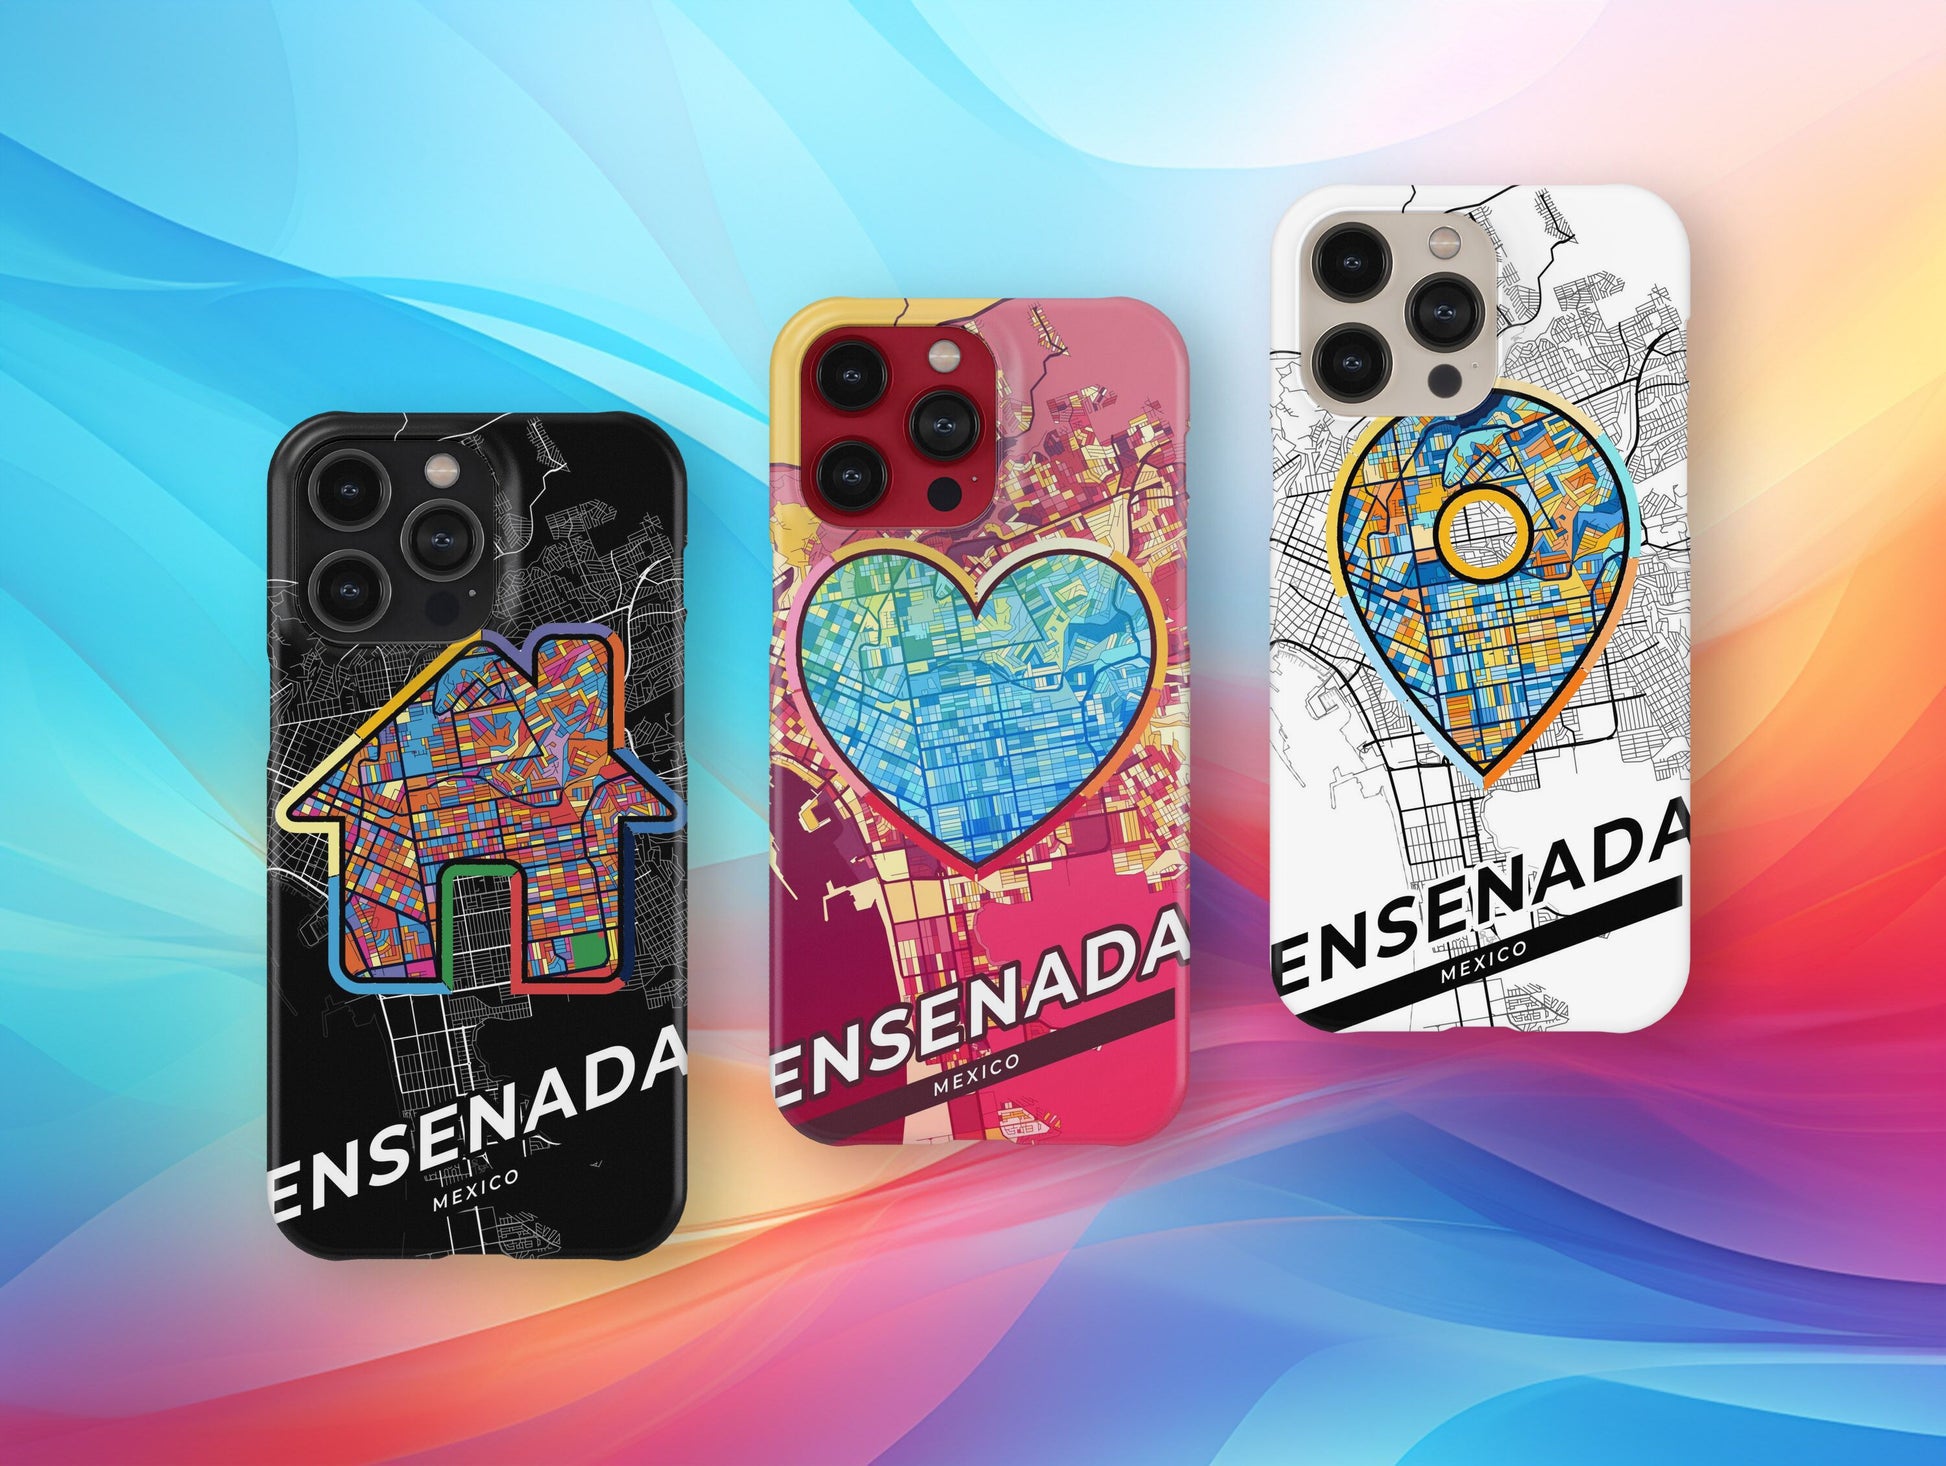 Ensenada Mexico slim phone case with colorful icon. Birthday, wedding or housewarming gift. Couple match cases.